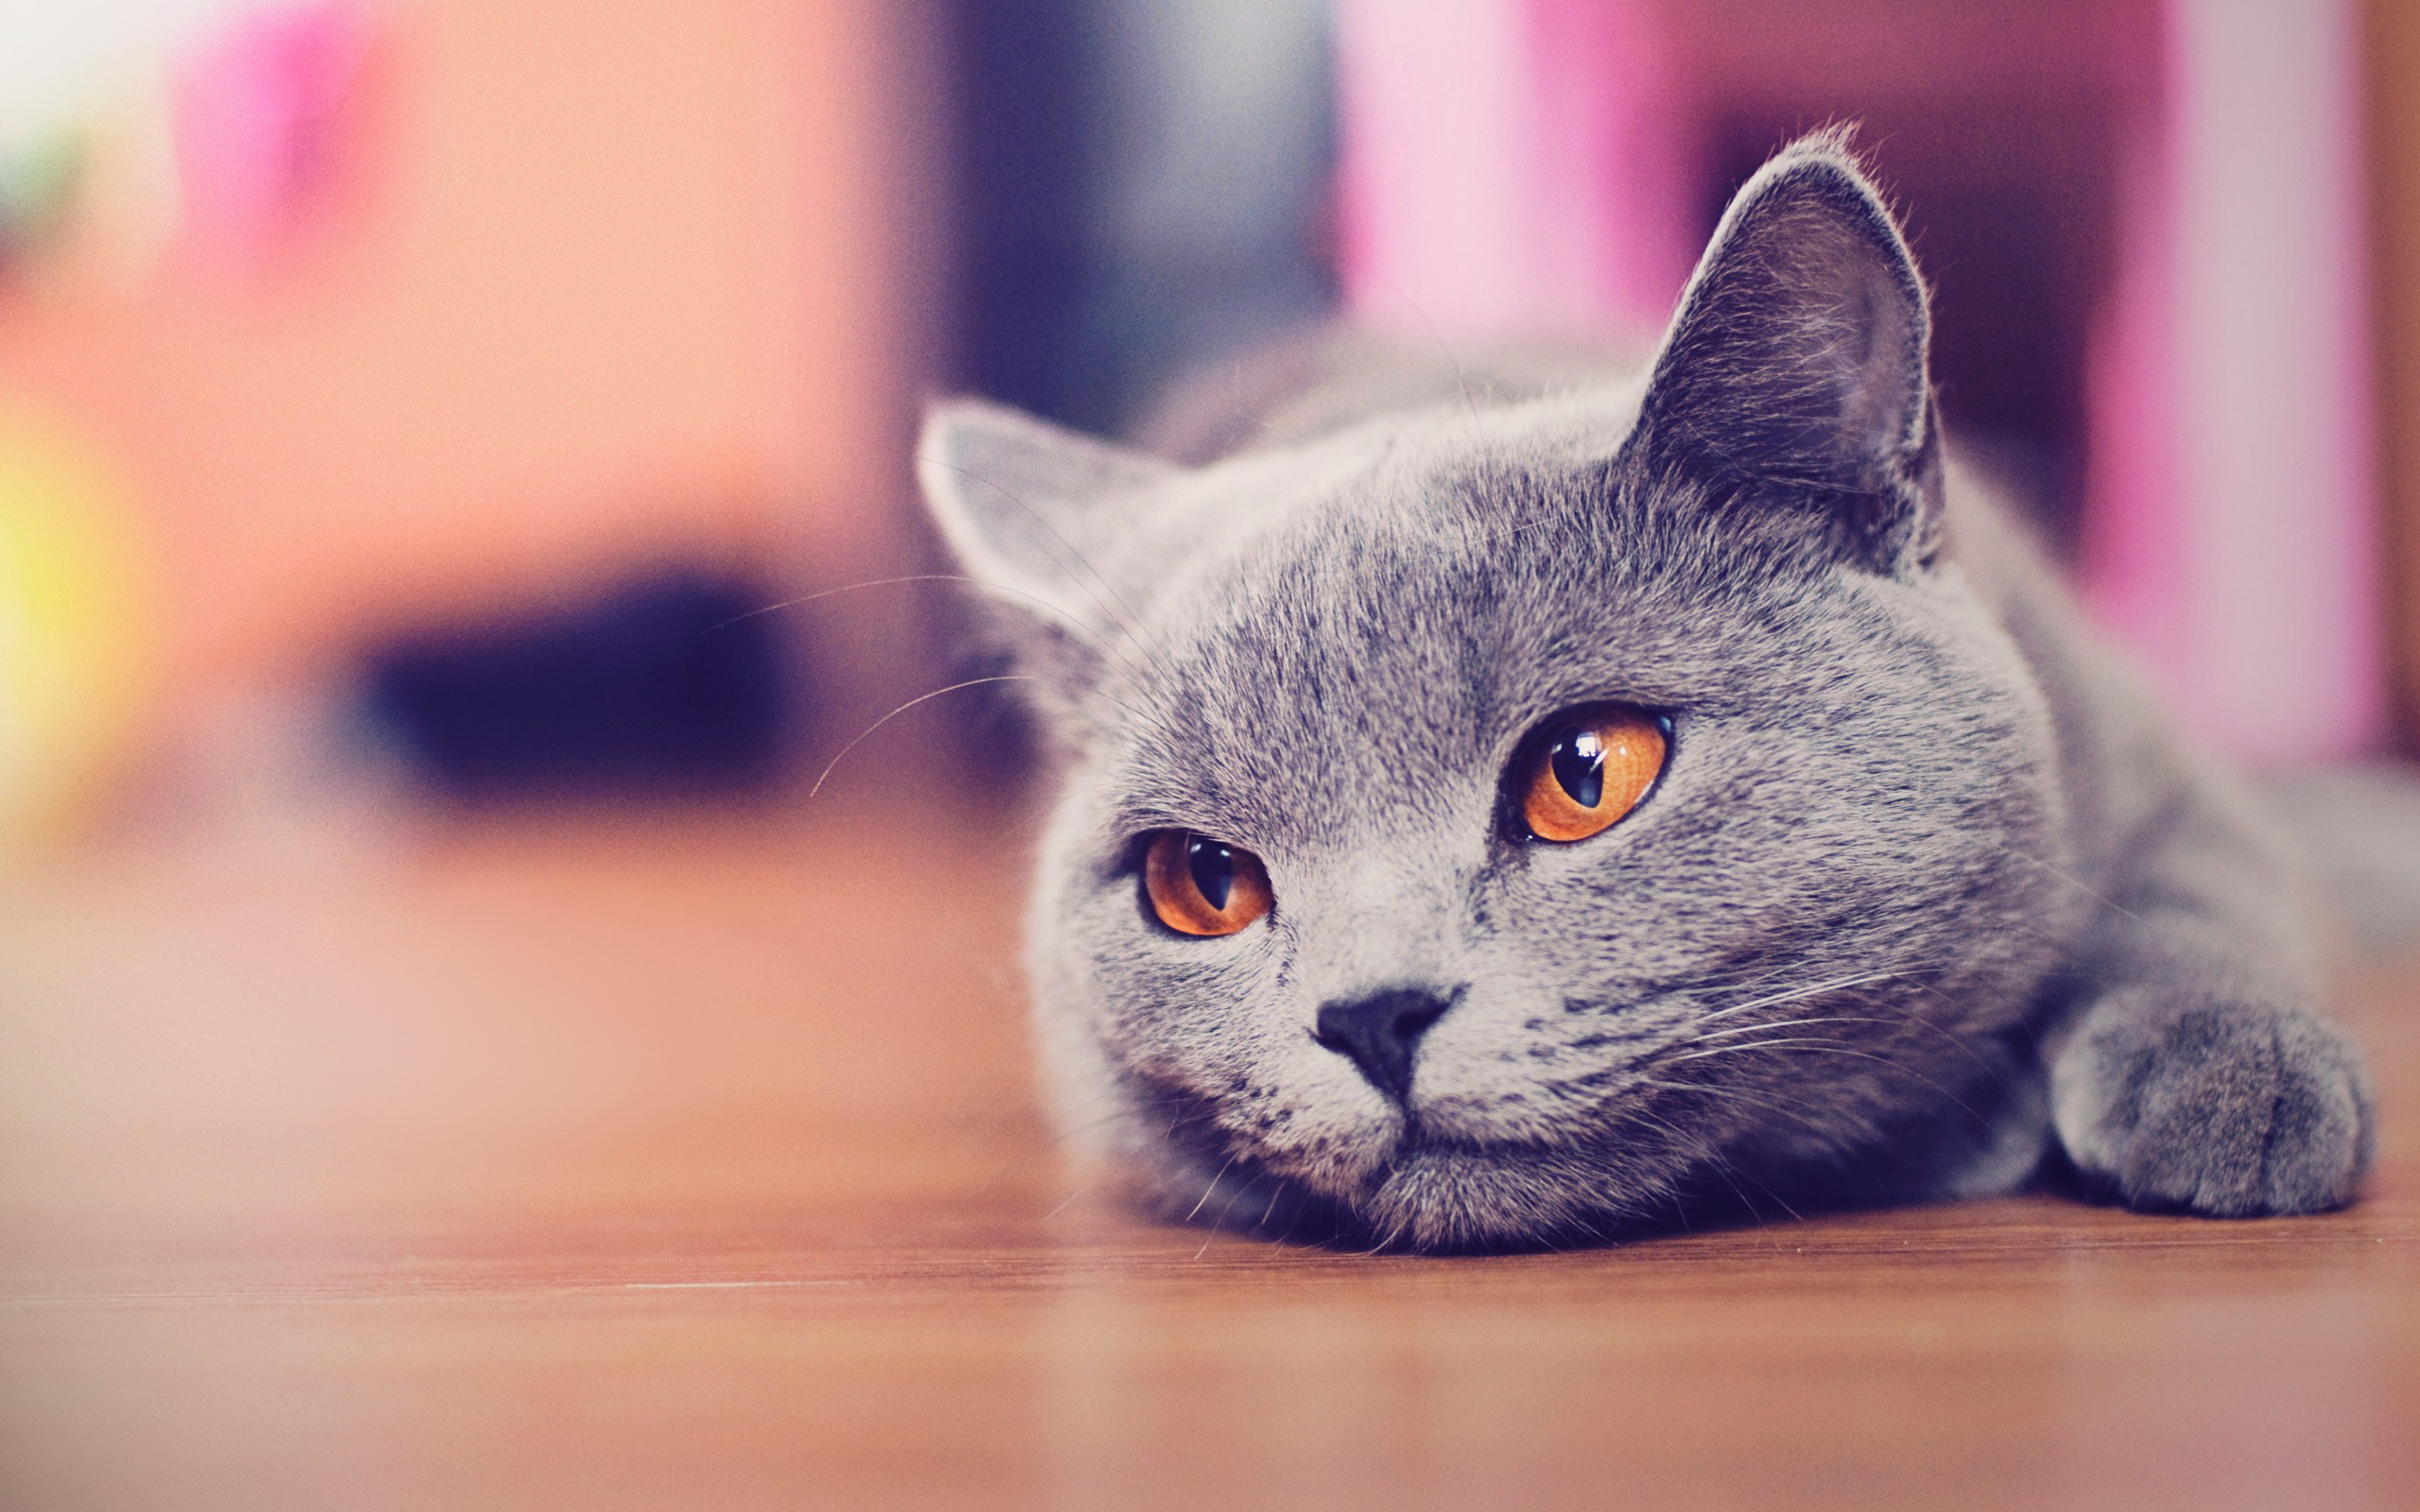 60 Cat  wallpapers    Download  free awesome full  HD  